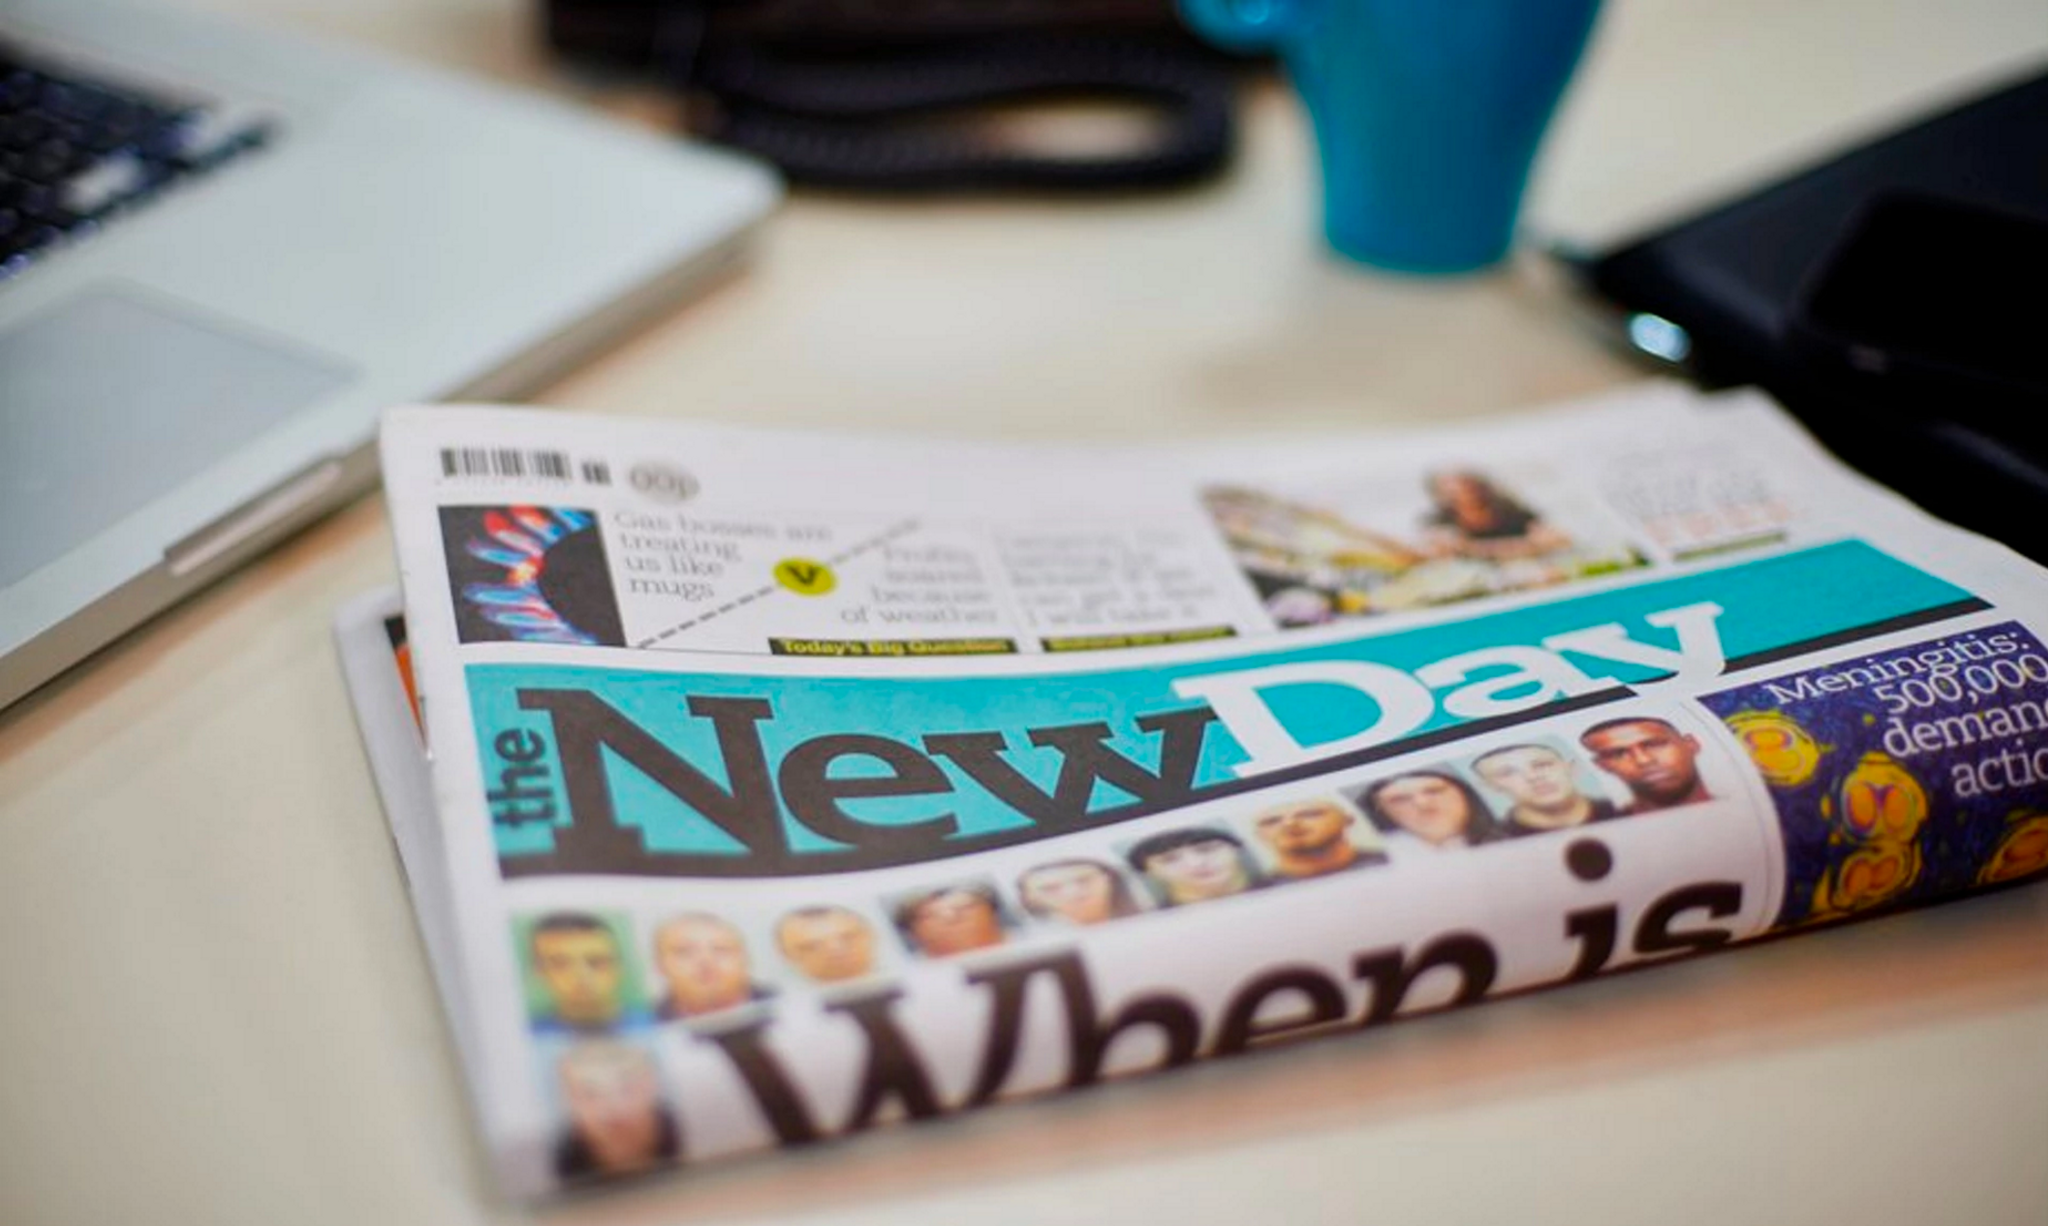 A UK newspaper has launched for the first time in 30 years